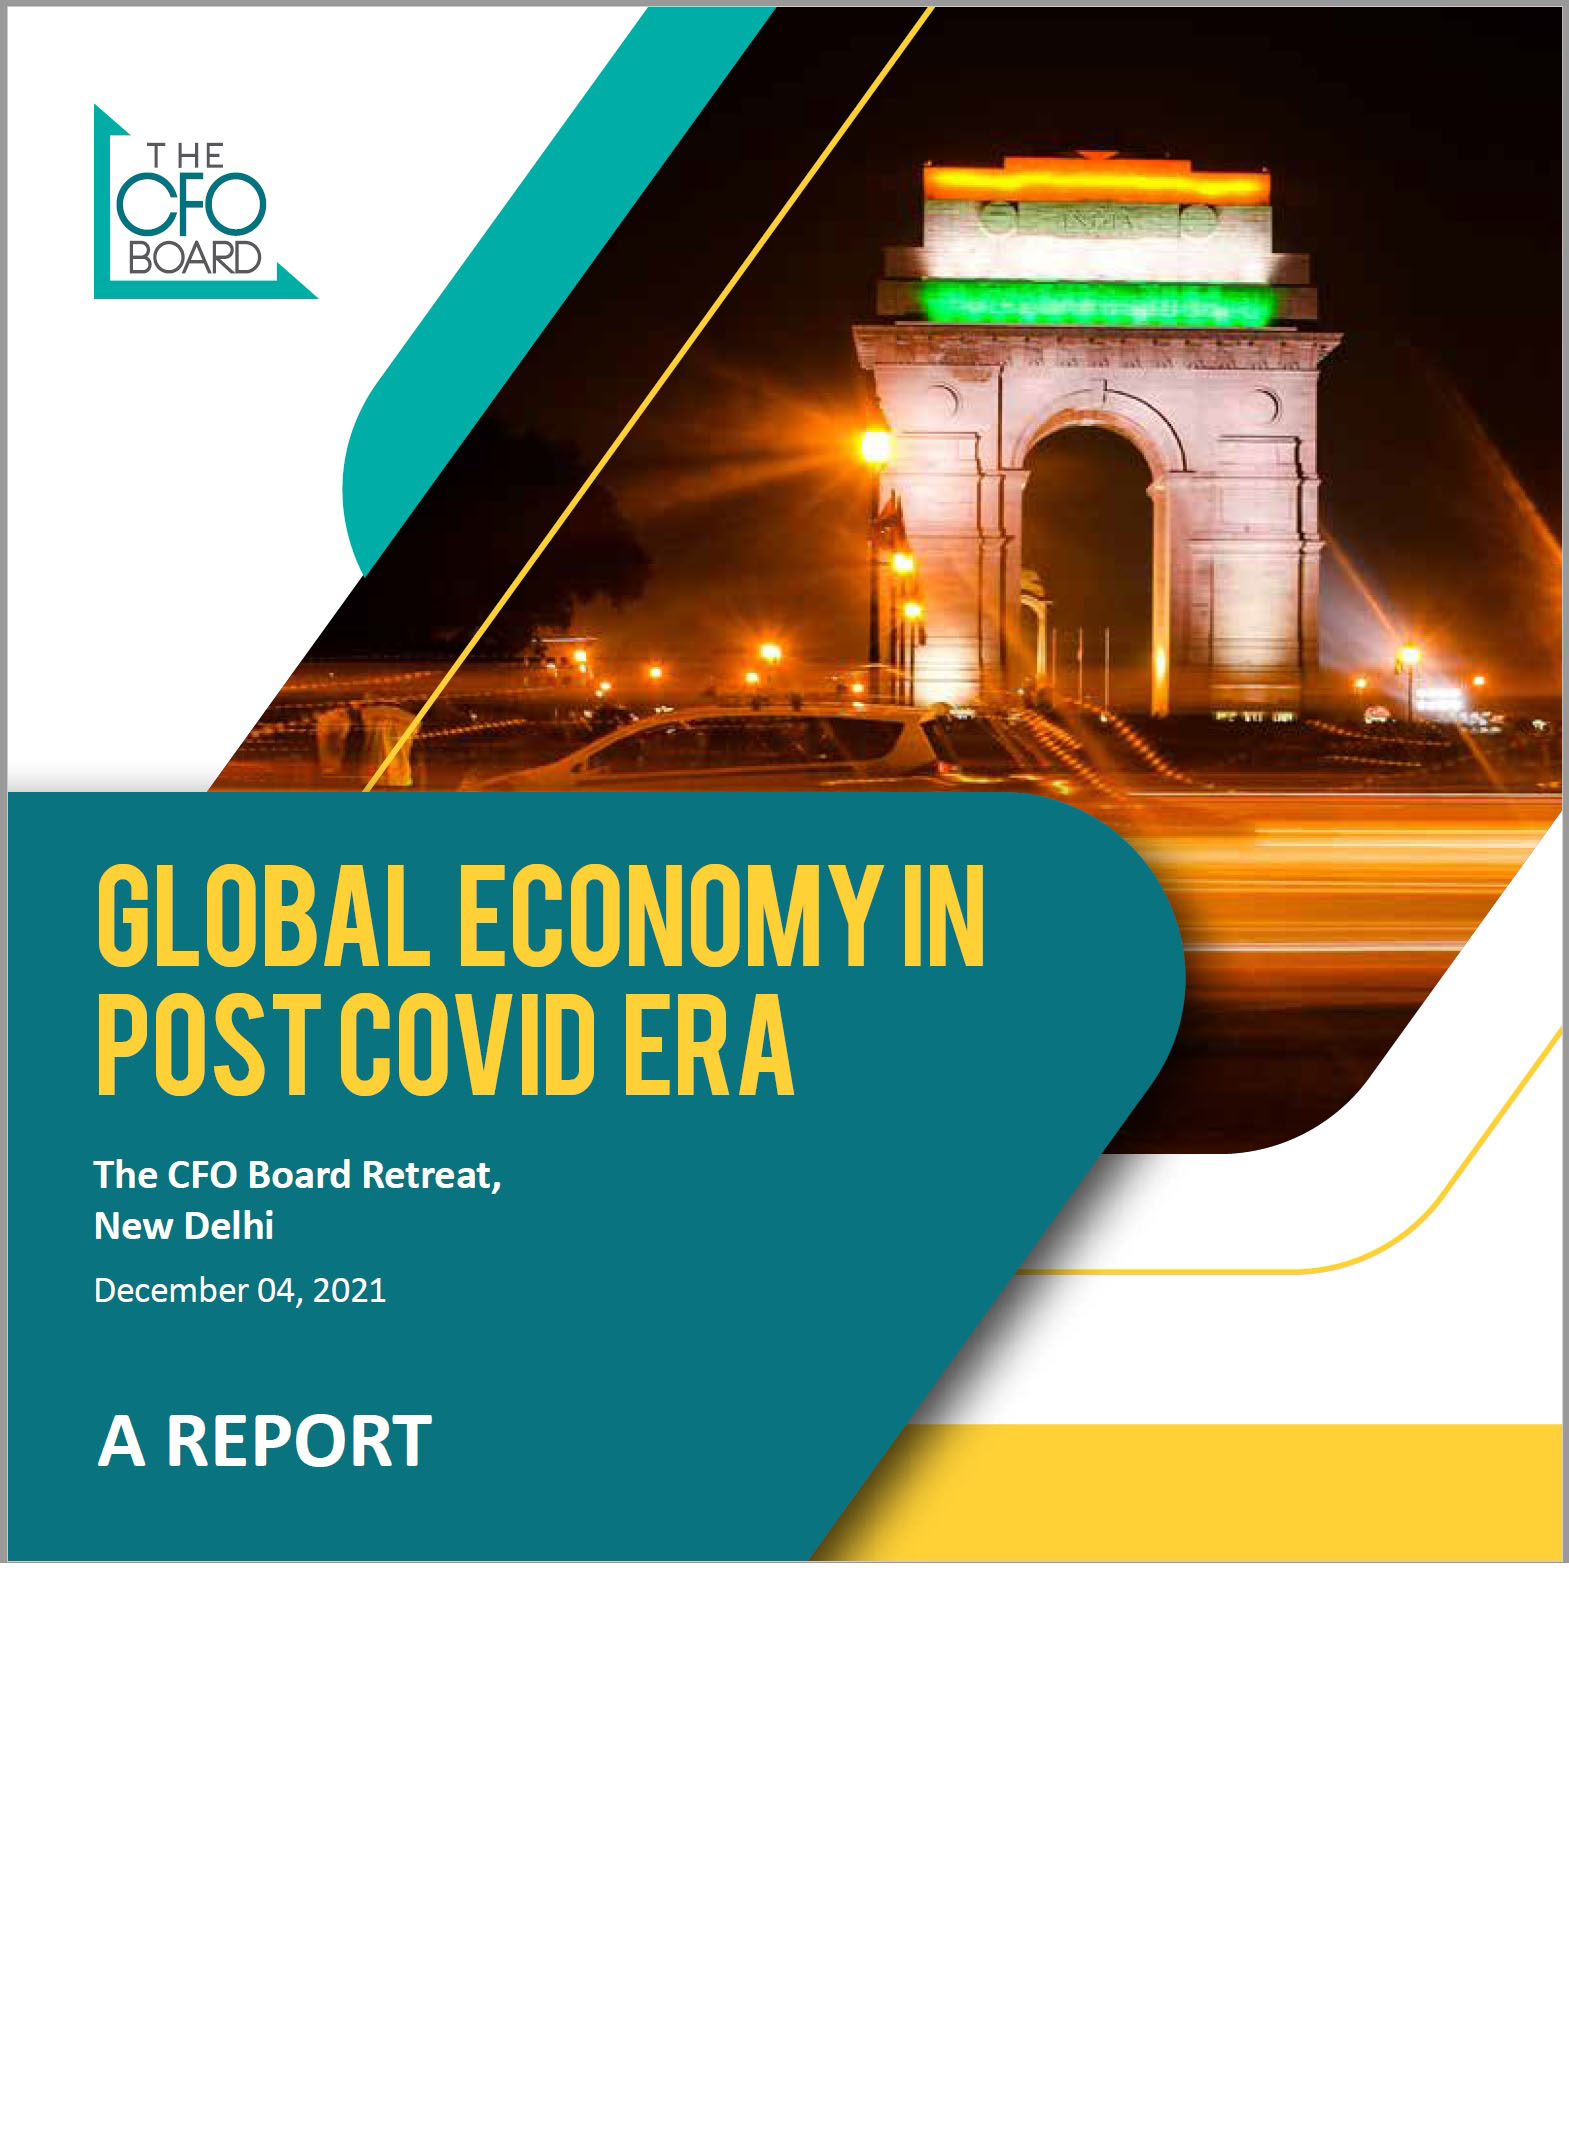 The Global Economy in the Post Covid Era